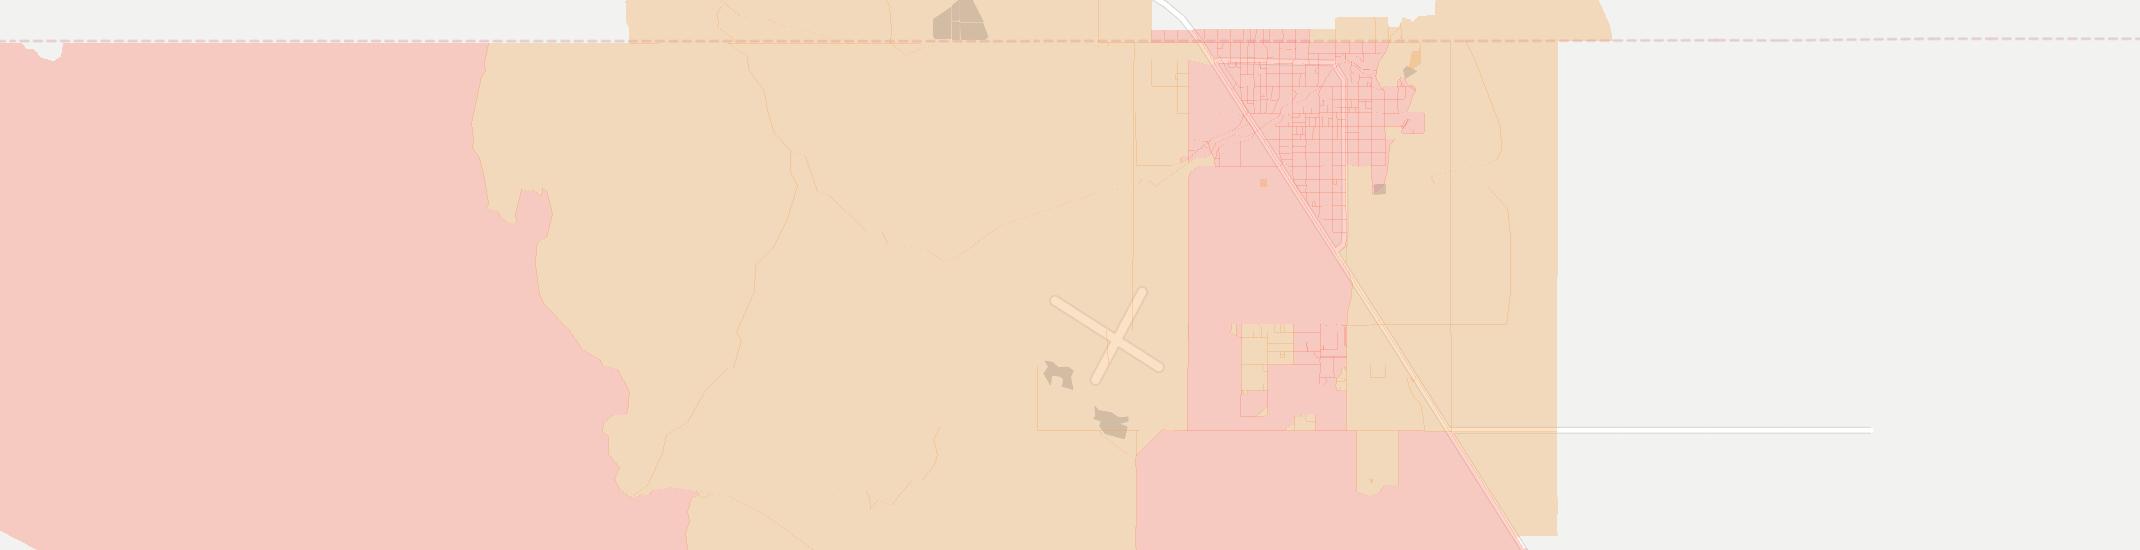 Colorado City Internet Competition Map. Click for interactive map.